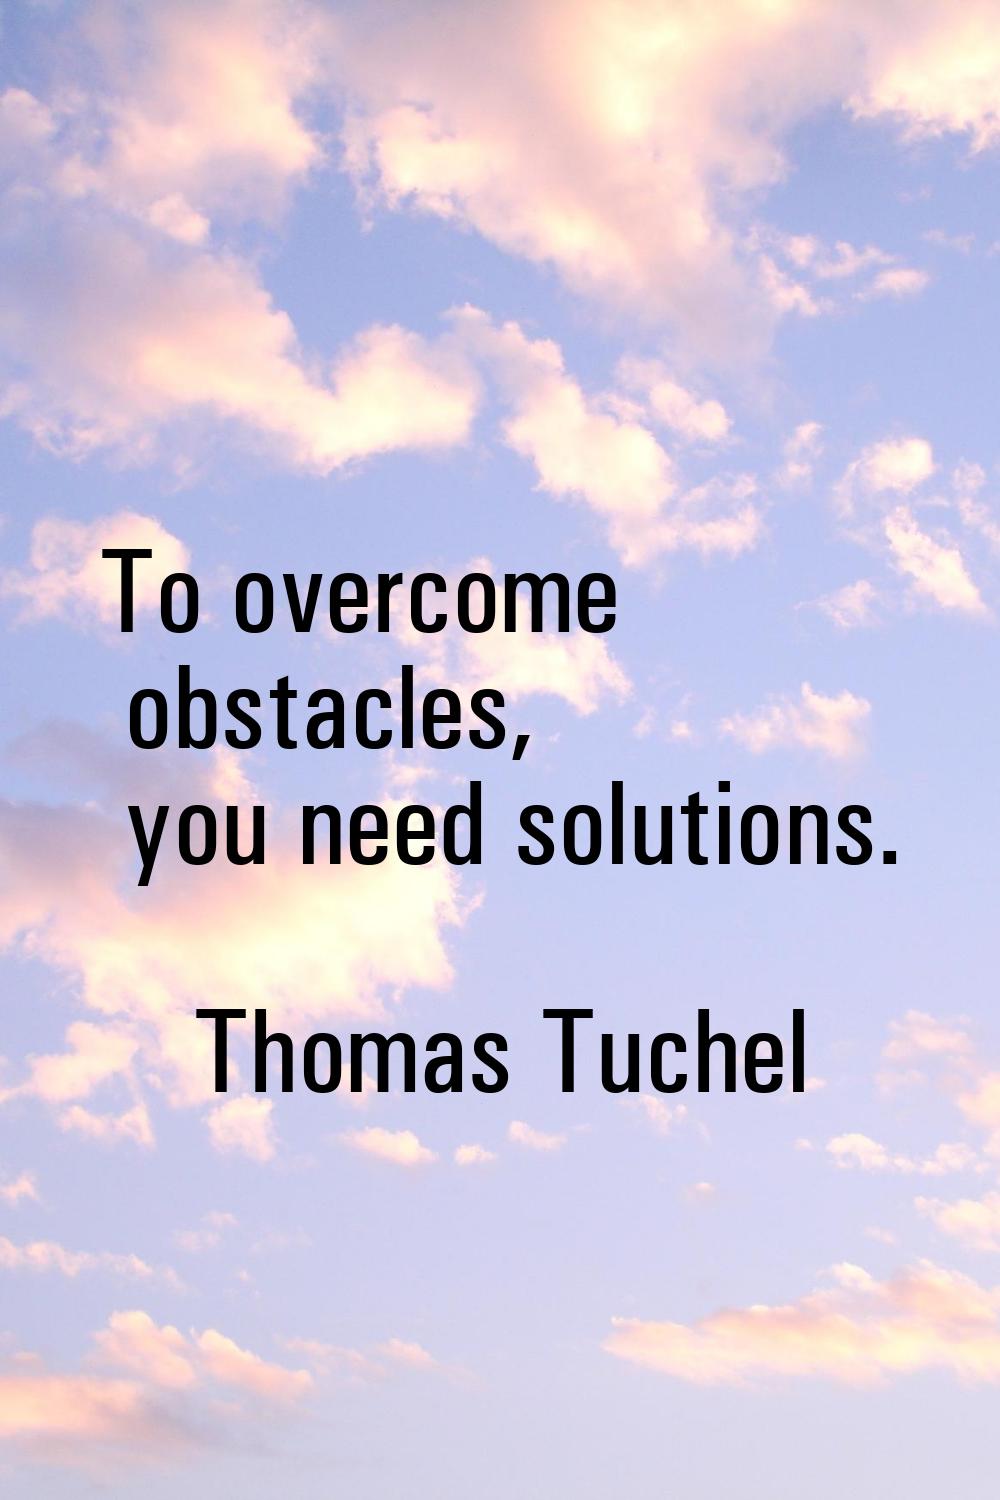 To overcome obstacles, you need solutions.